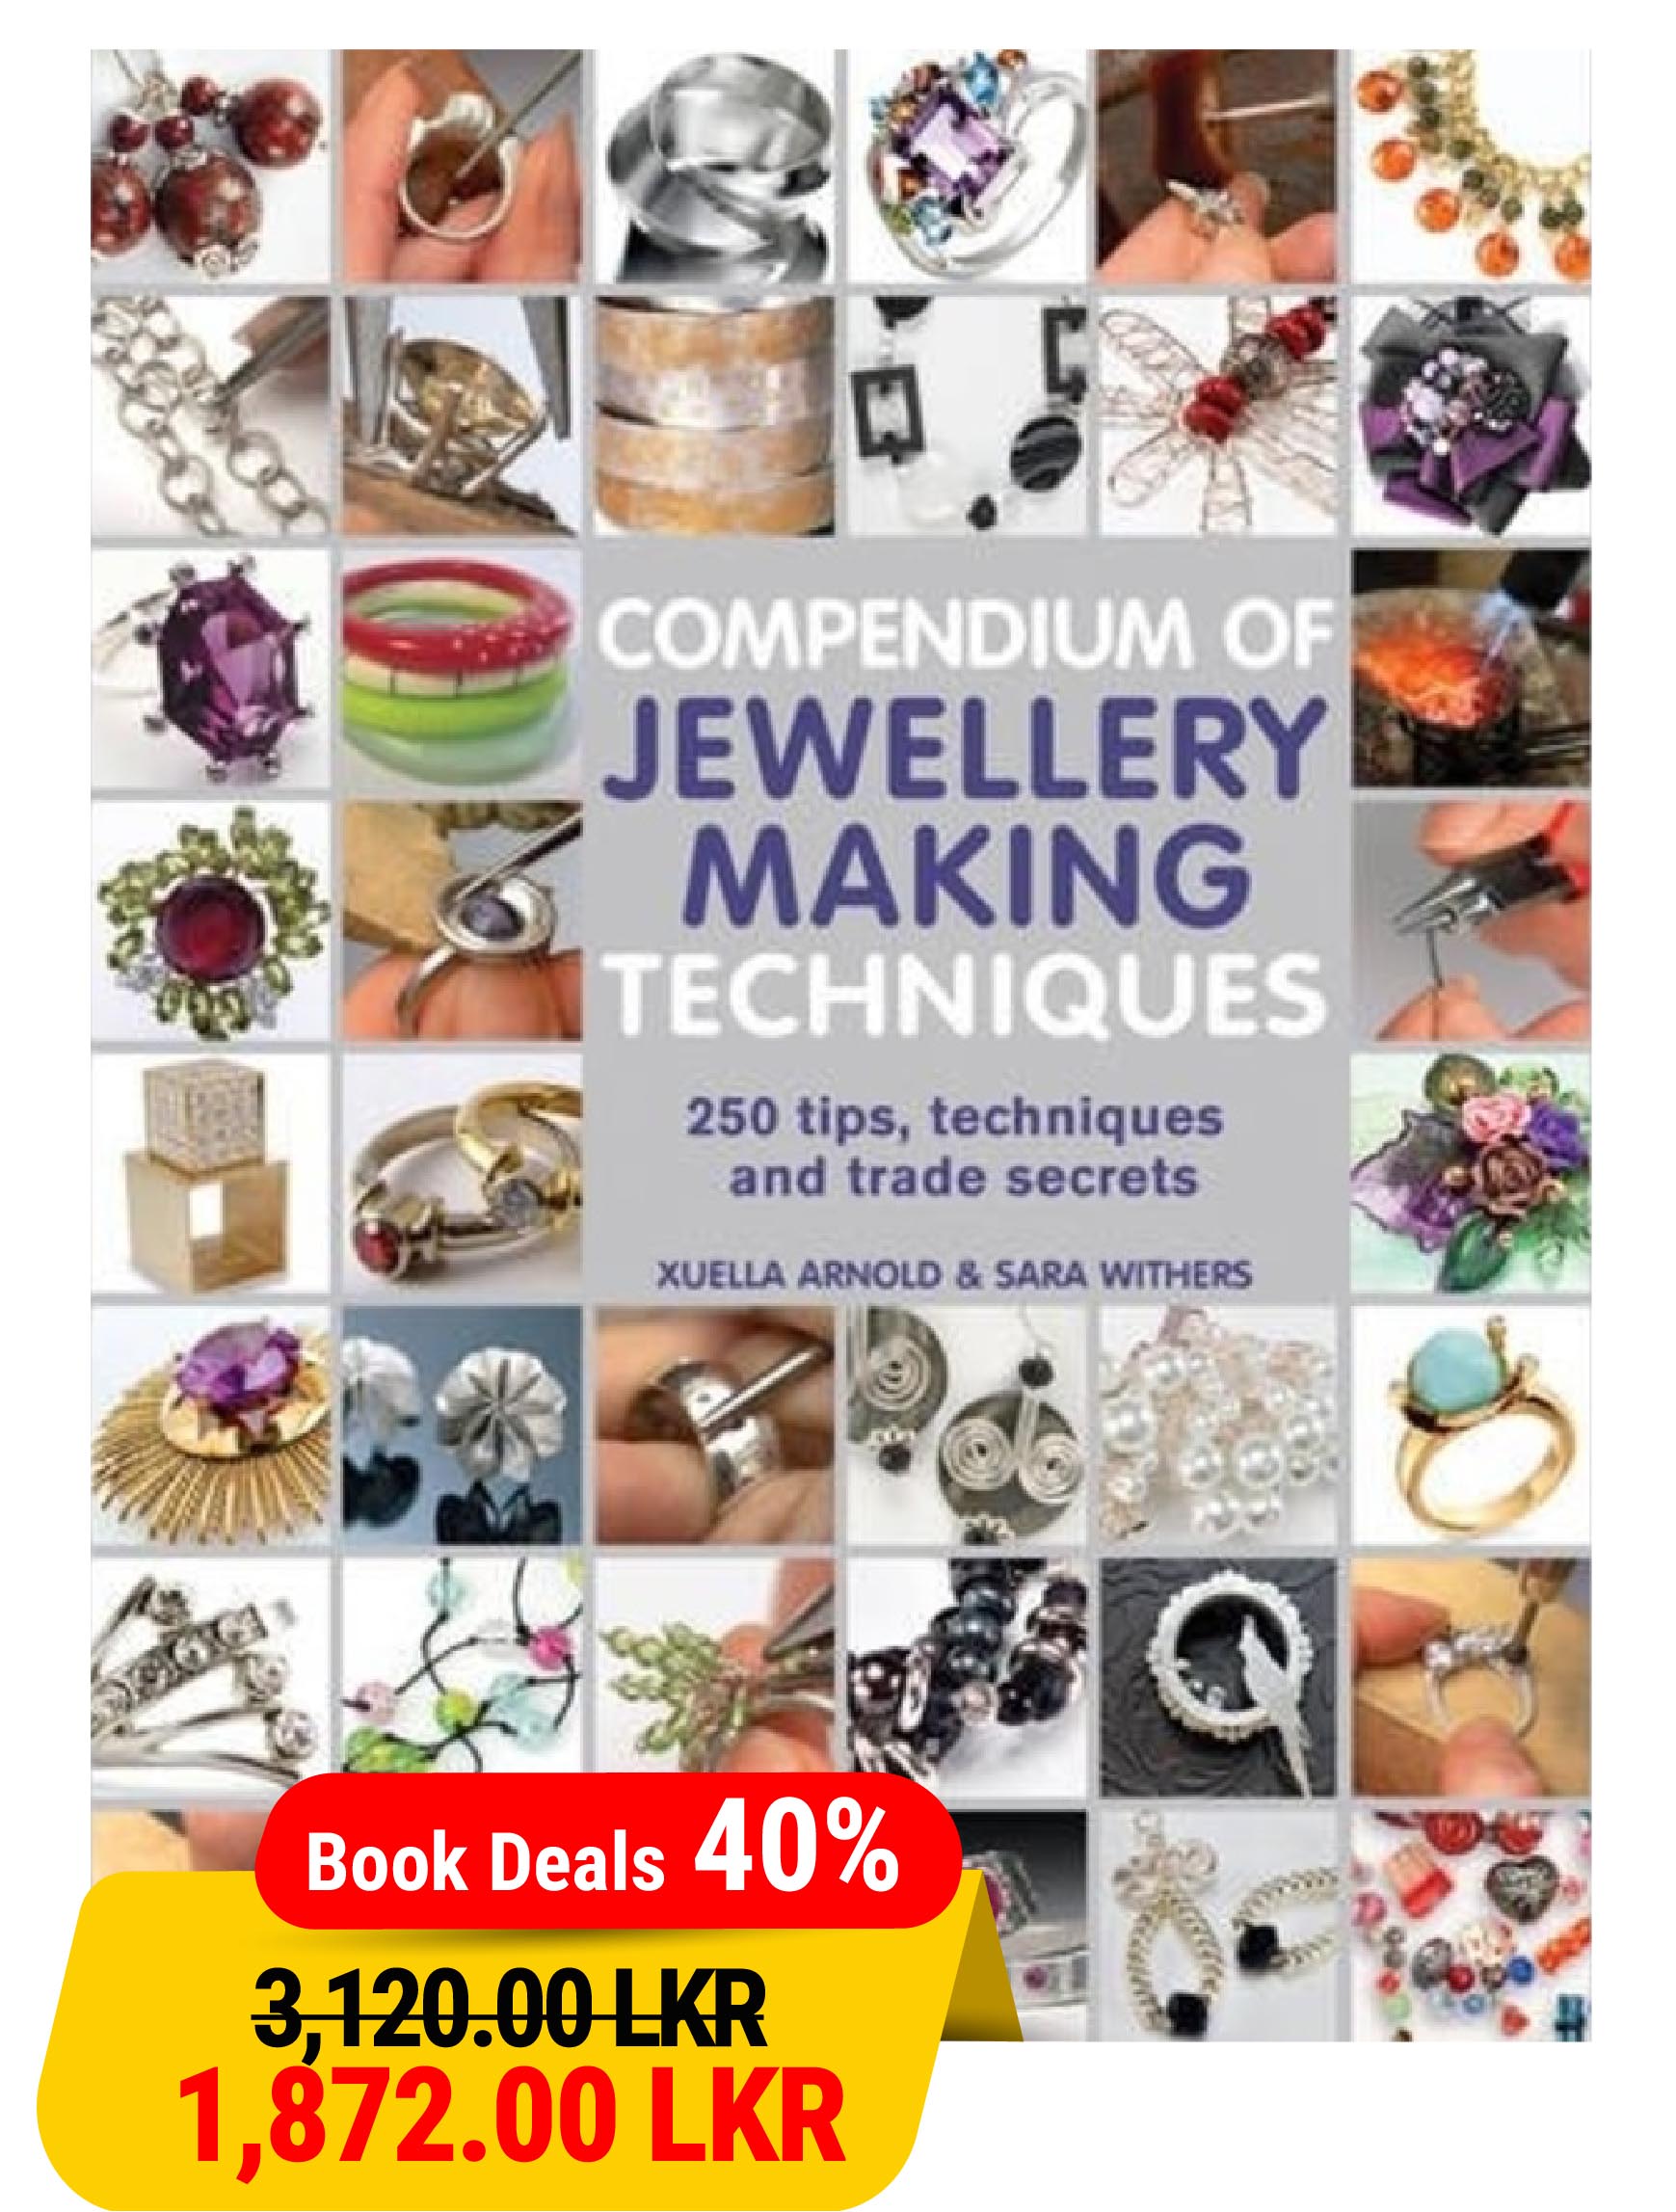 Compendium of Jewellery Making Techniques: 200 Tips, Techniques and Trade Secrets